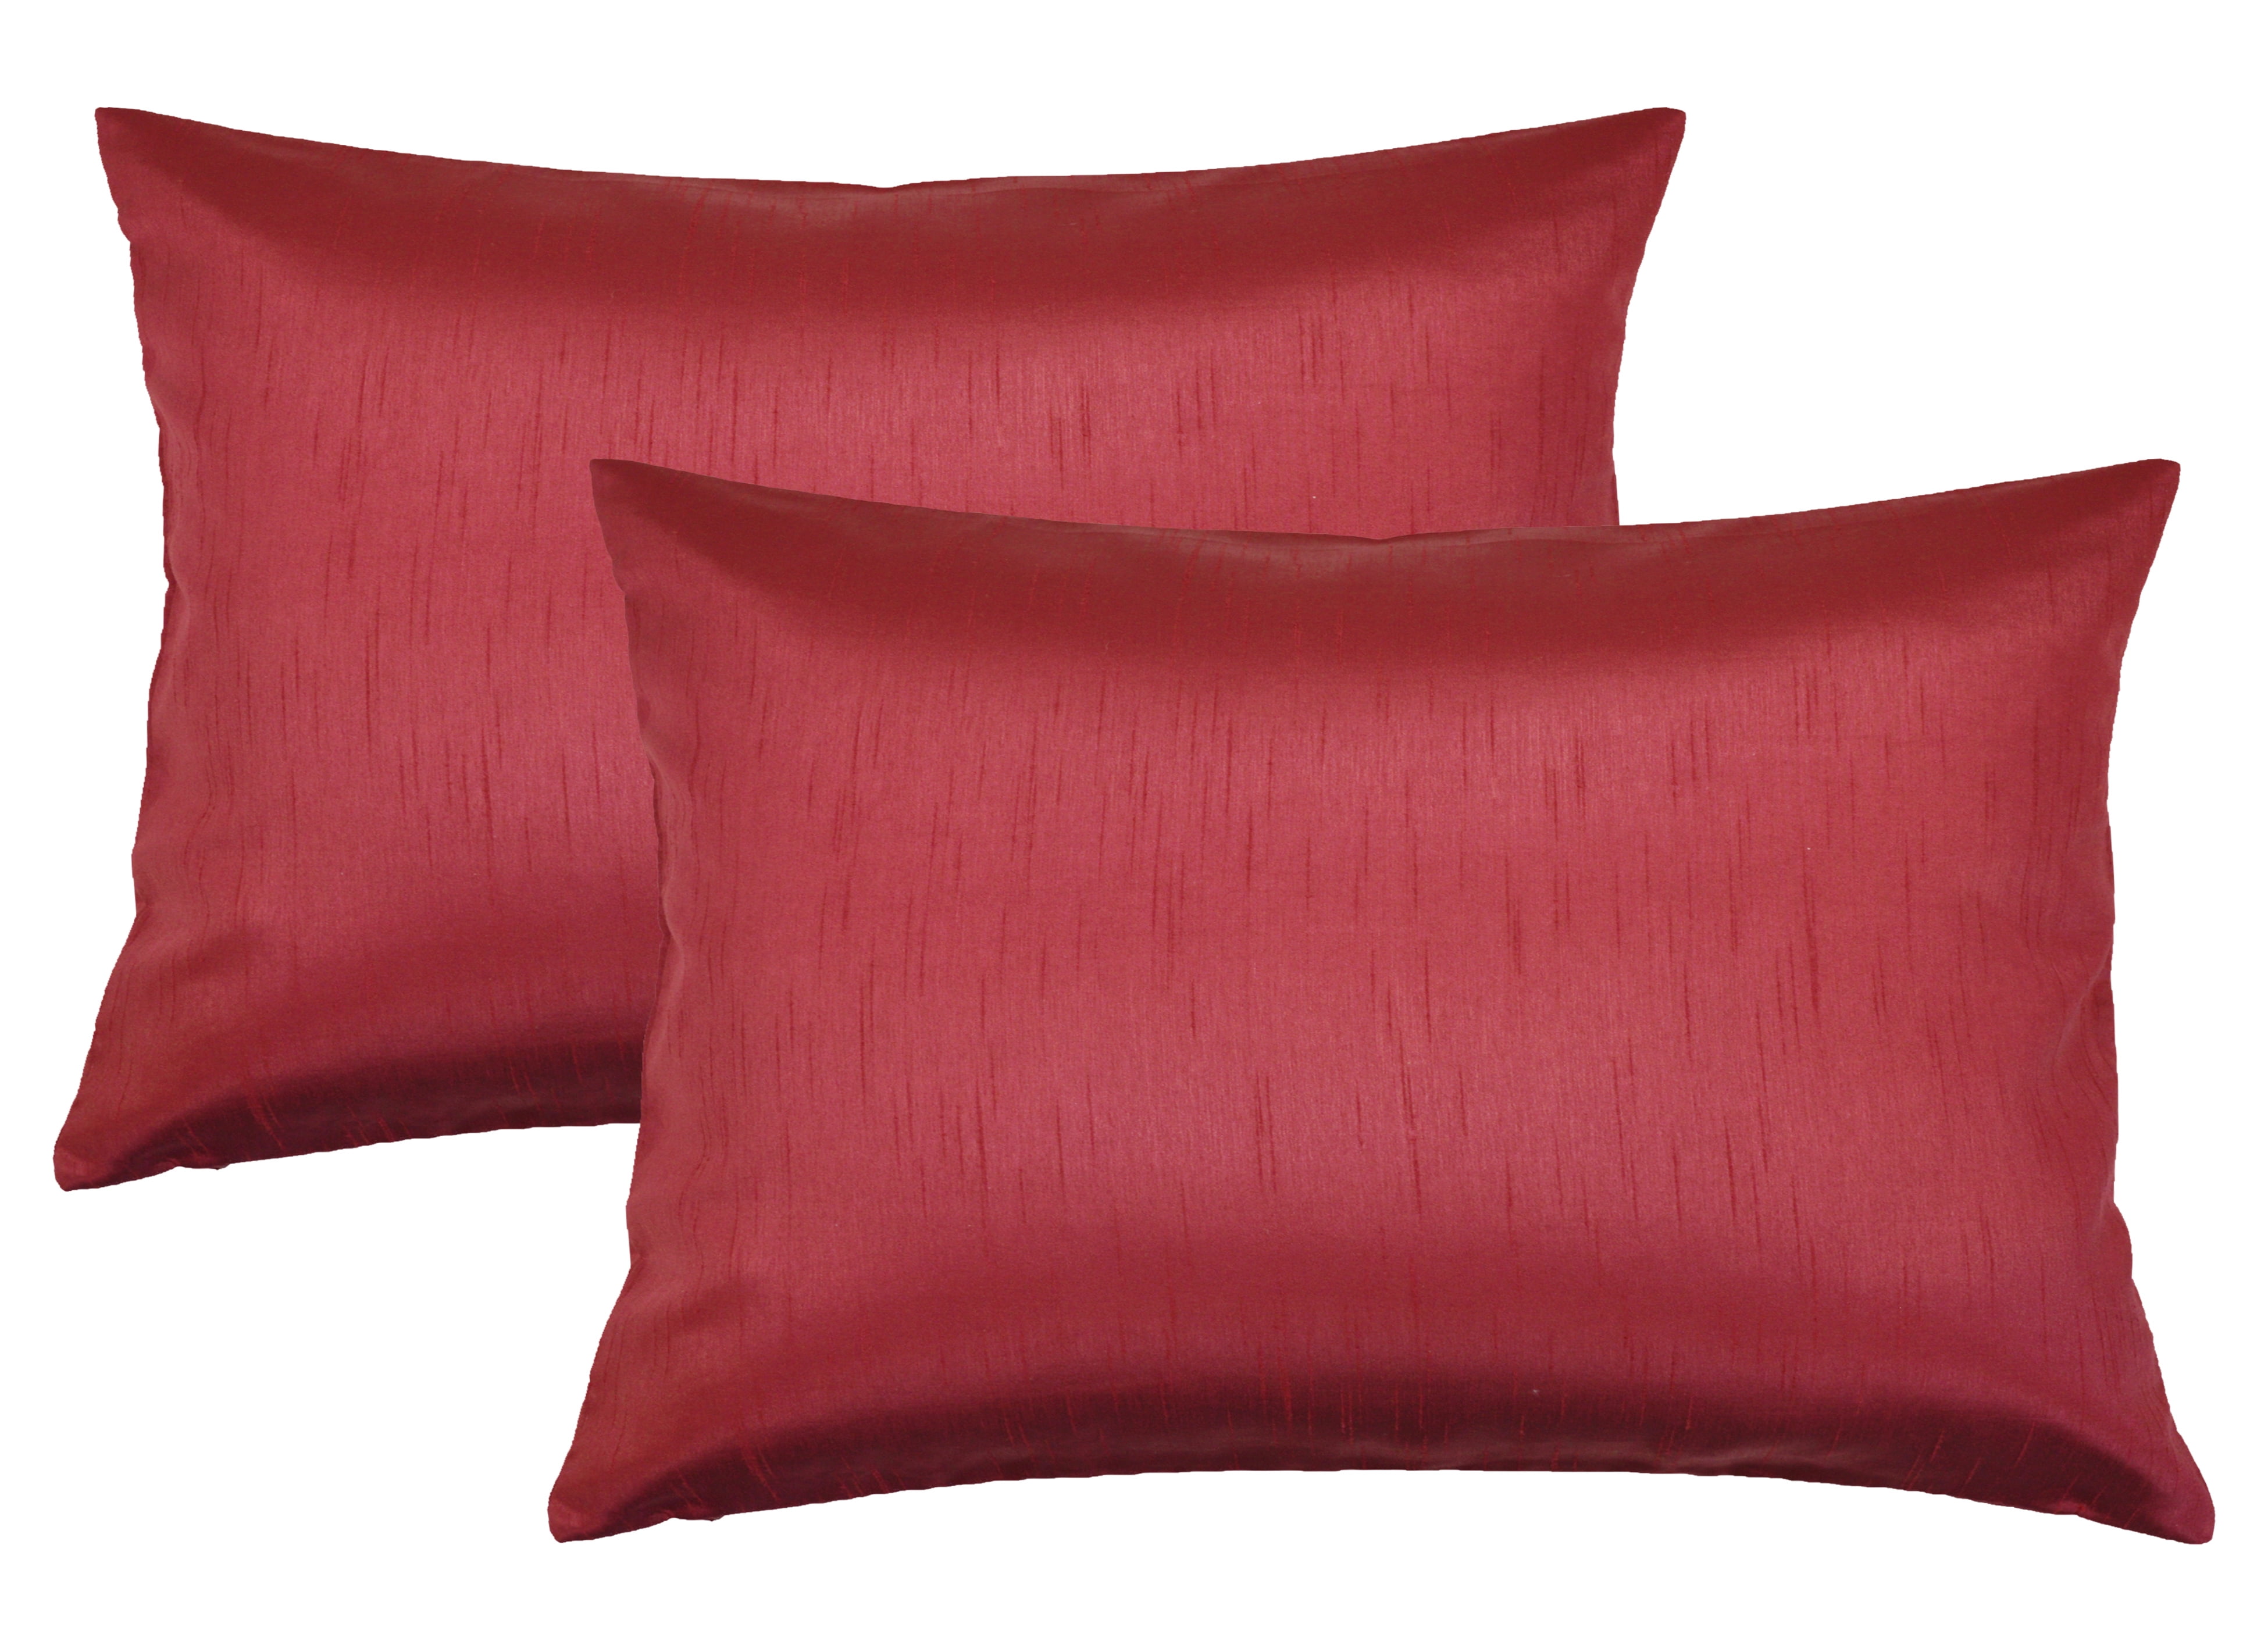 Aiking Home 12x18 Inches Faux Silk Square Throw Pillow Cover, Zipper Closure, Red (Set of 2